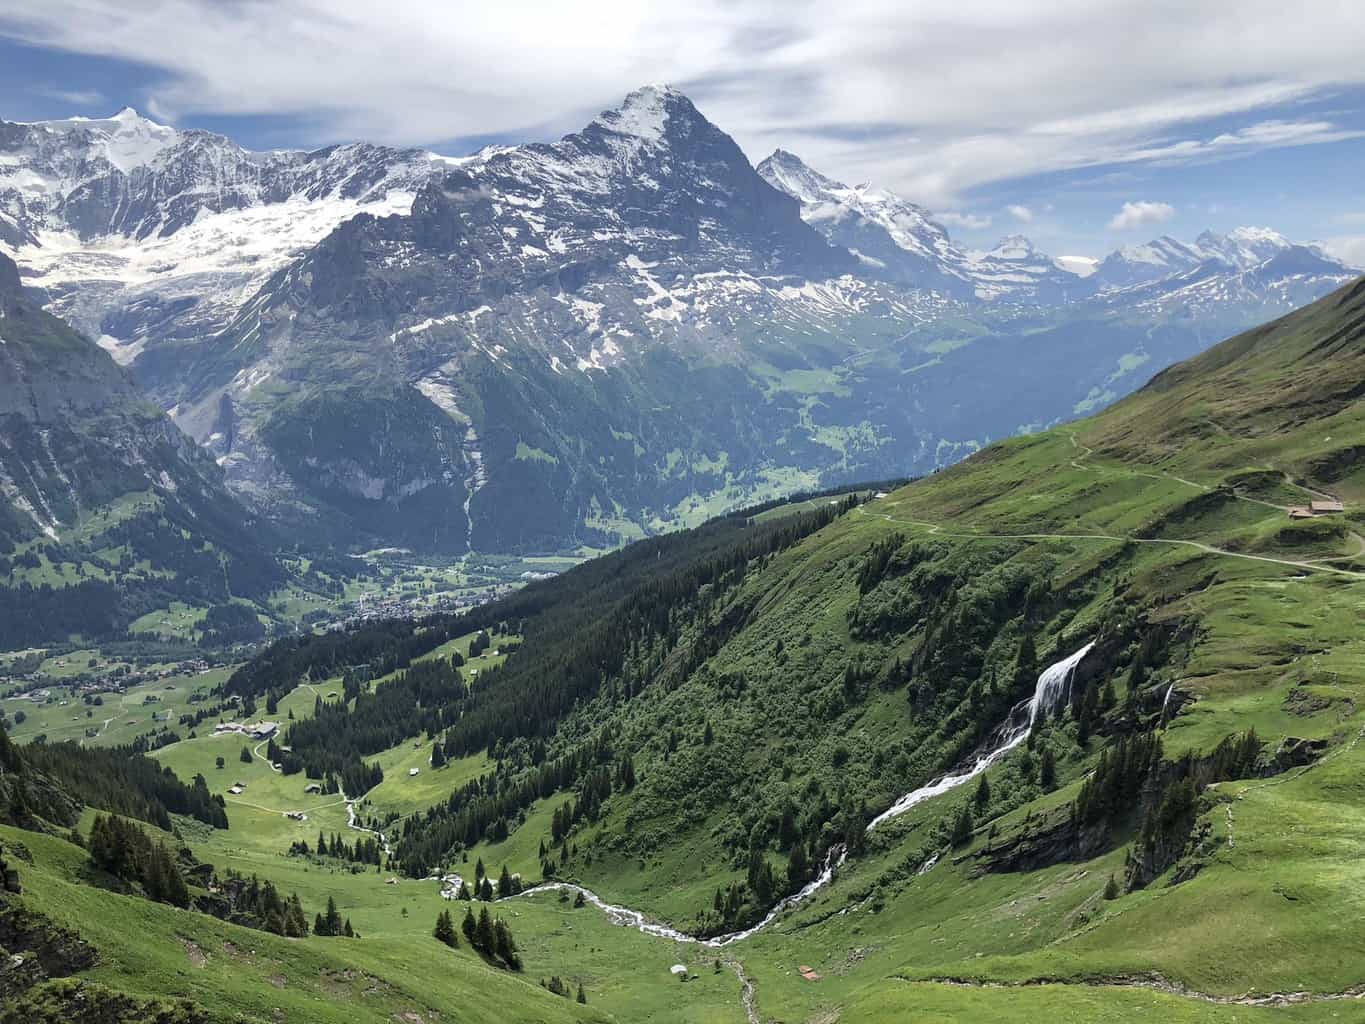 Across the Swiss Alps, Hiking in the Alps